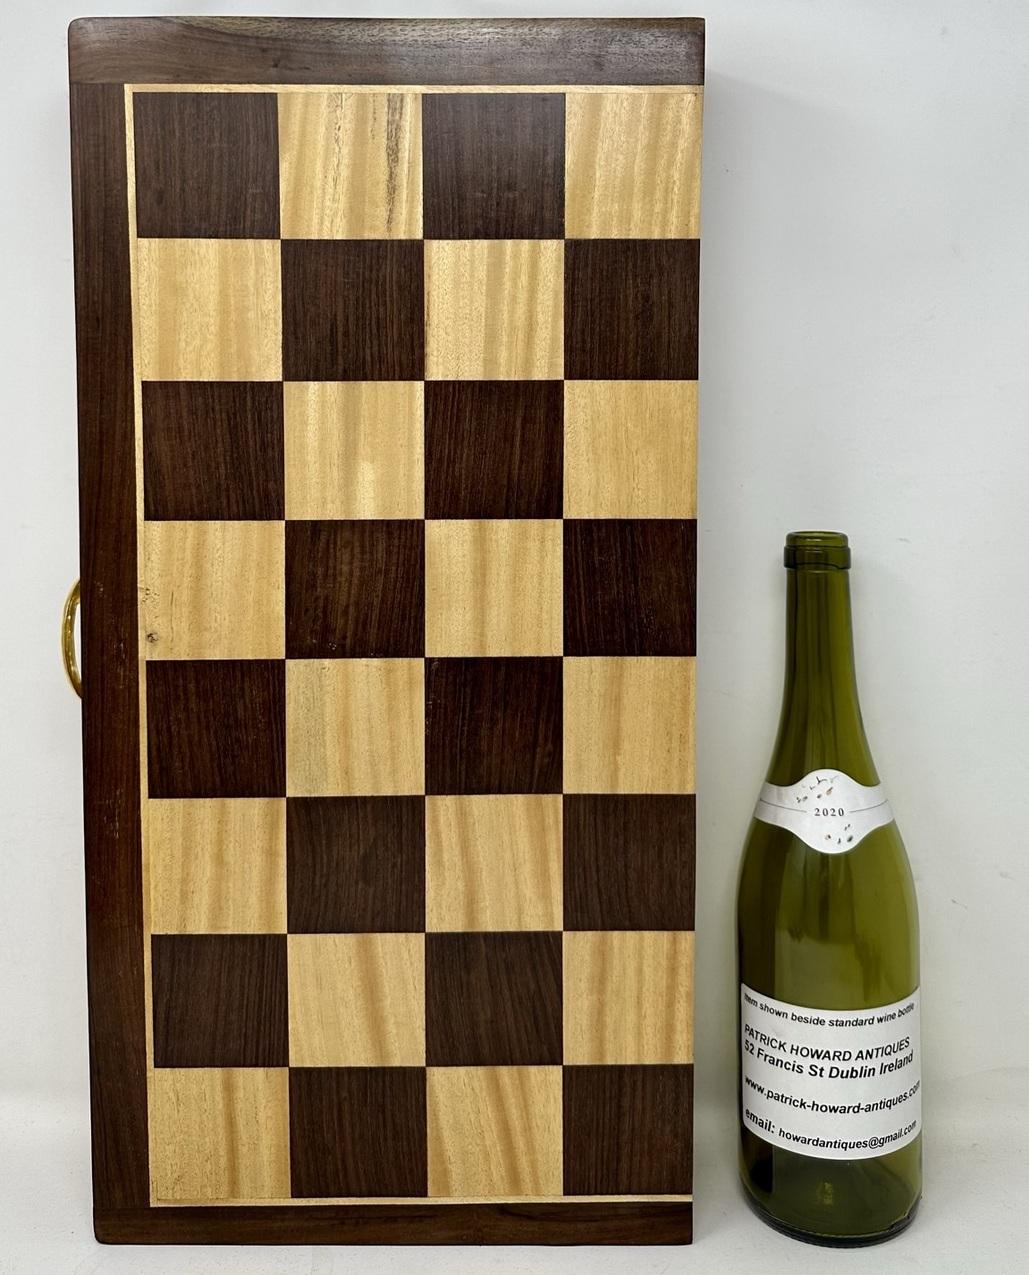 Fine Vintage Large French Polished Santos Mahogany Satinwood Folding Chess Set In Good Condition For Sale In Dublin, Ireland